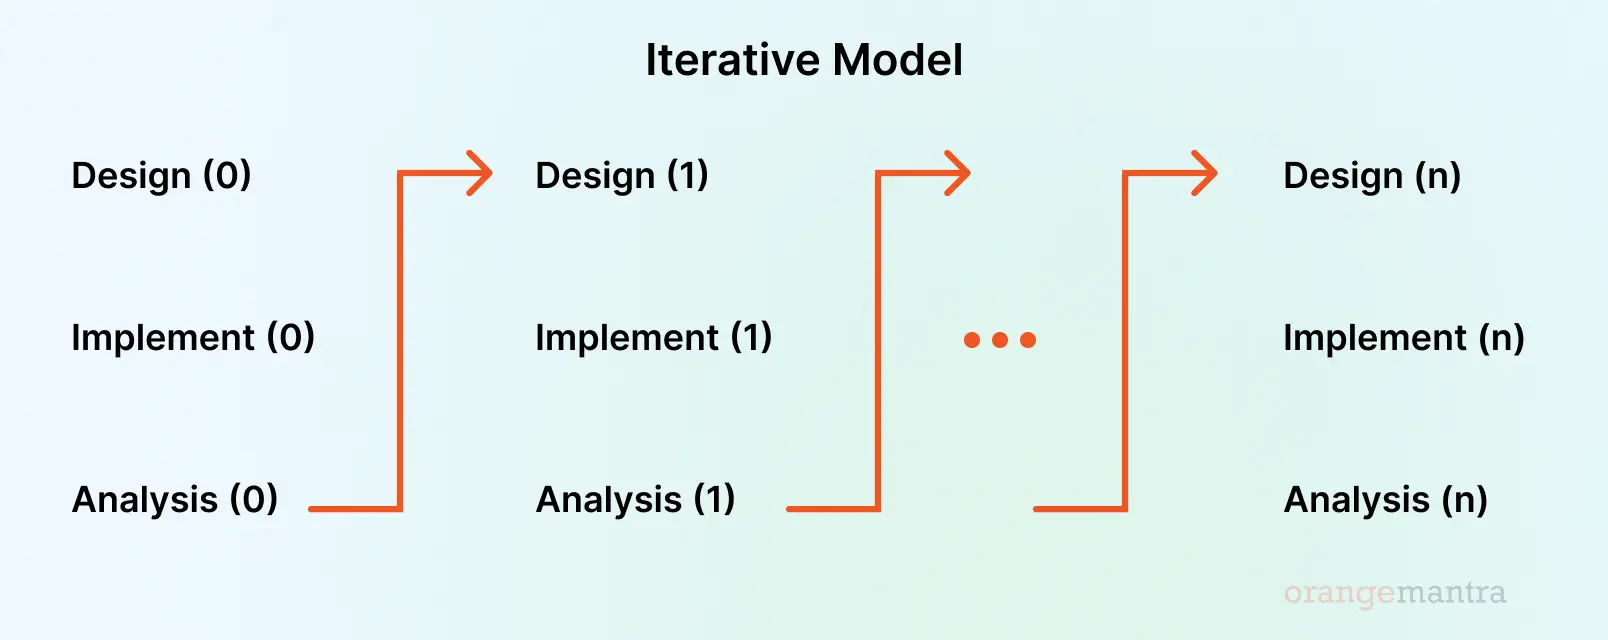 Orange-Mantra-guide-on-creating-an-iterative-model.